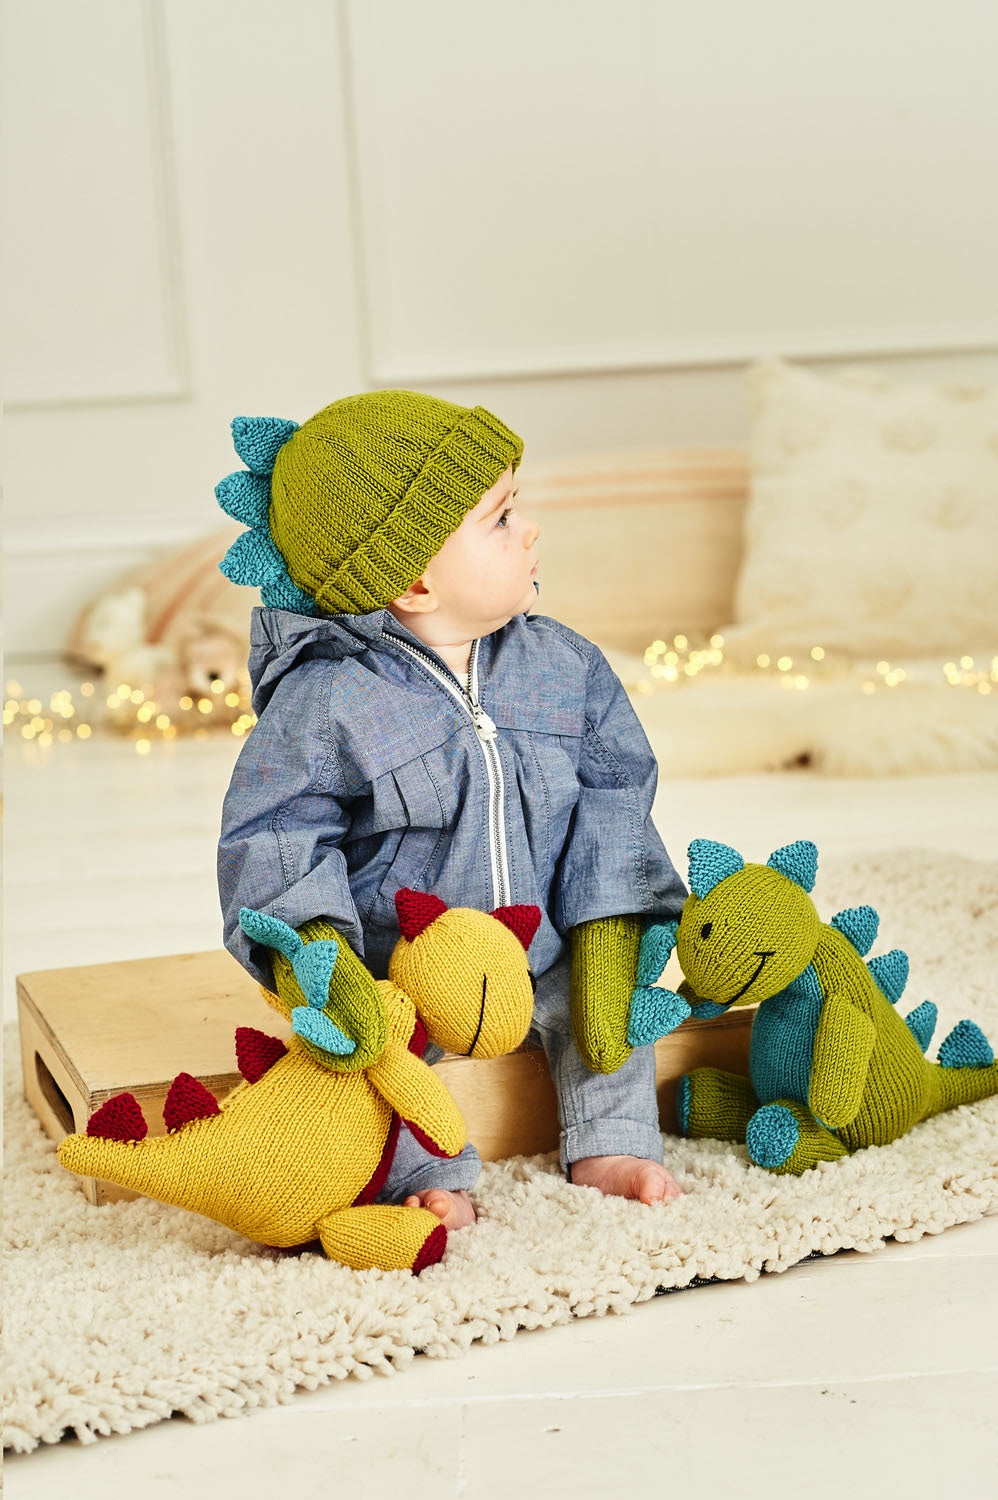 Knitting Pattern 9853 - Danny the Dinosaur Toy with Hat & Mittens in Bellissima, Special DK, Bambino DK